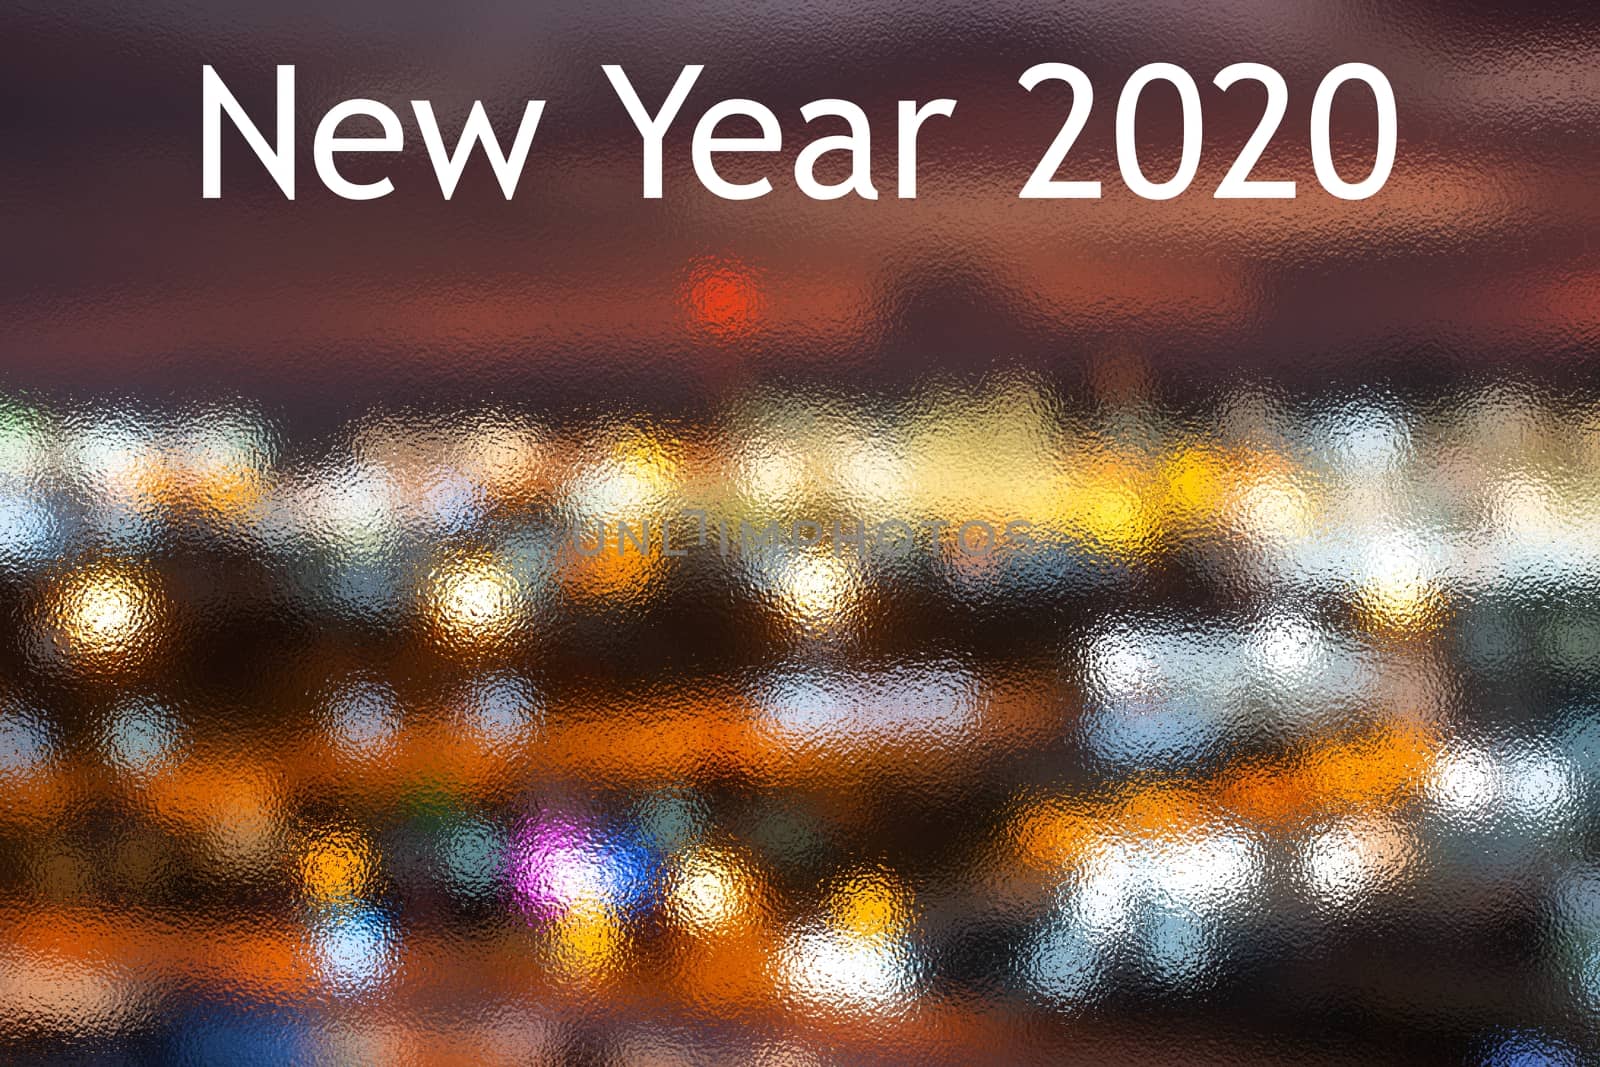 The Happy New Year 2020 With Dark Navy Blue Glitter Bokeh Light Sparkling Background,holiday Celebration